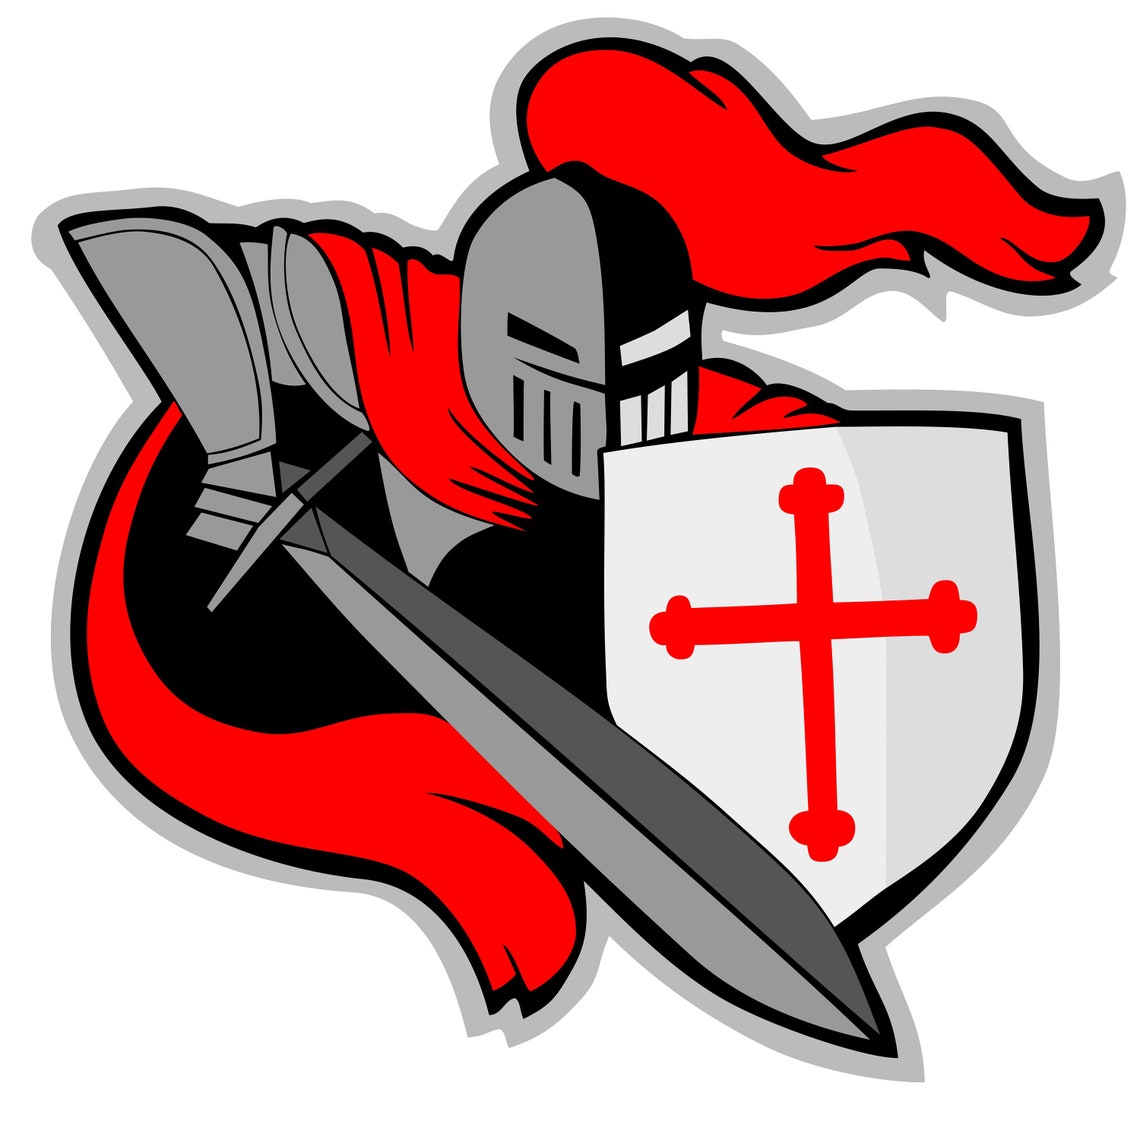 Crusader and Sword Mascot Silhouette and Cricut Cut Files - Etsy